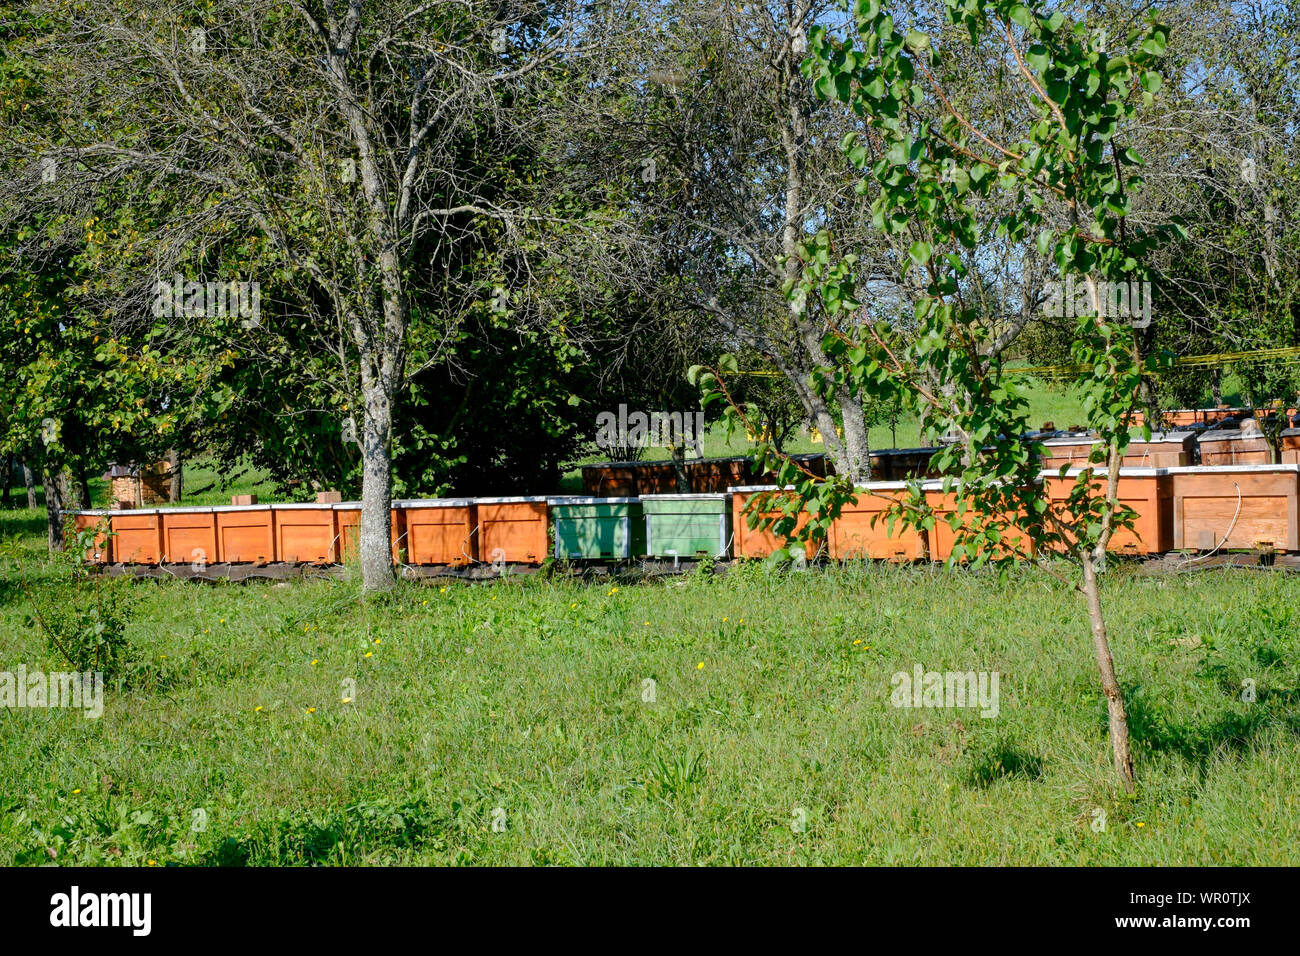 large collection of apiaries in a large rural garden zala county hungary Stock Photo